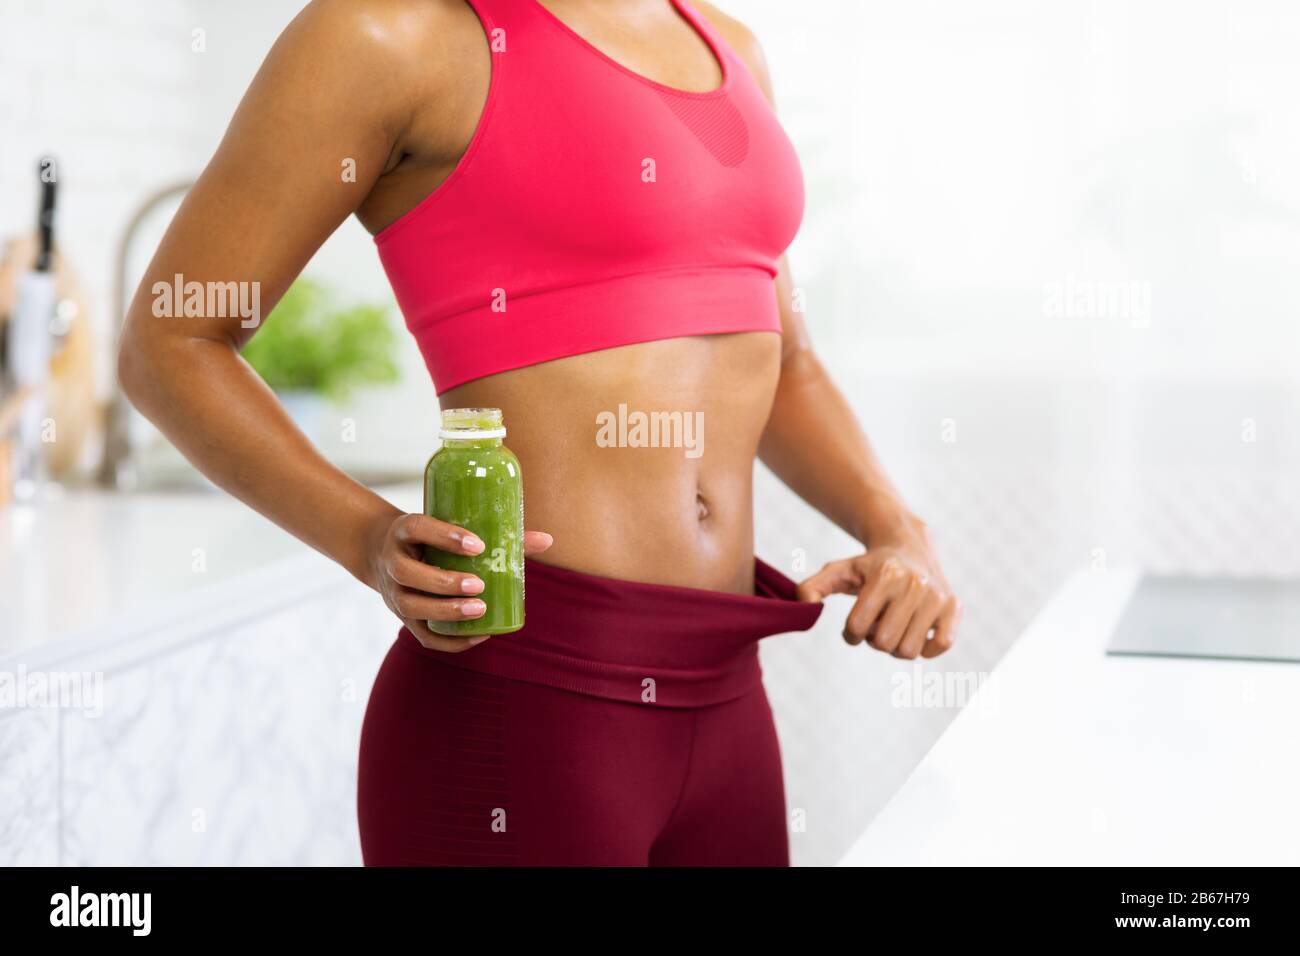 Fit Afro Girl In Oversize Pants Holding Detox Smoothie Stock Photo - Alamy